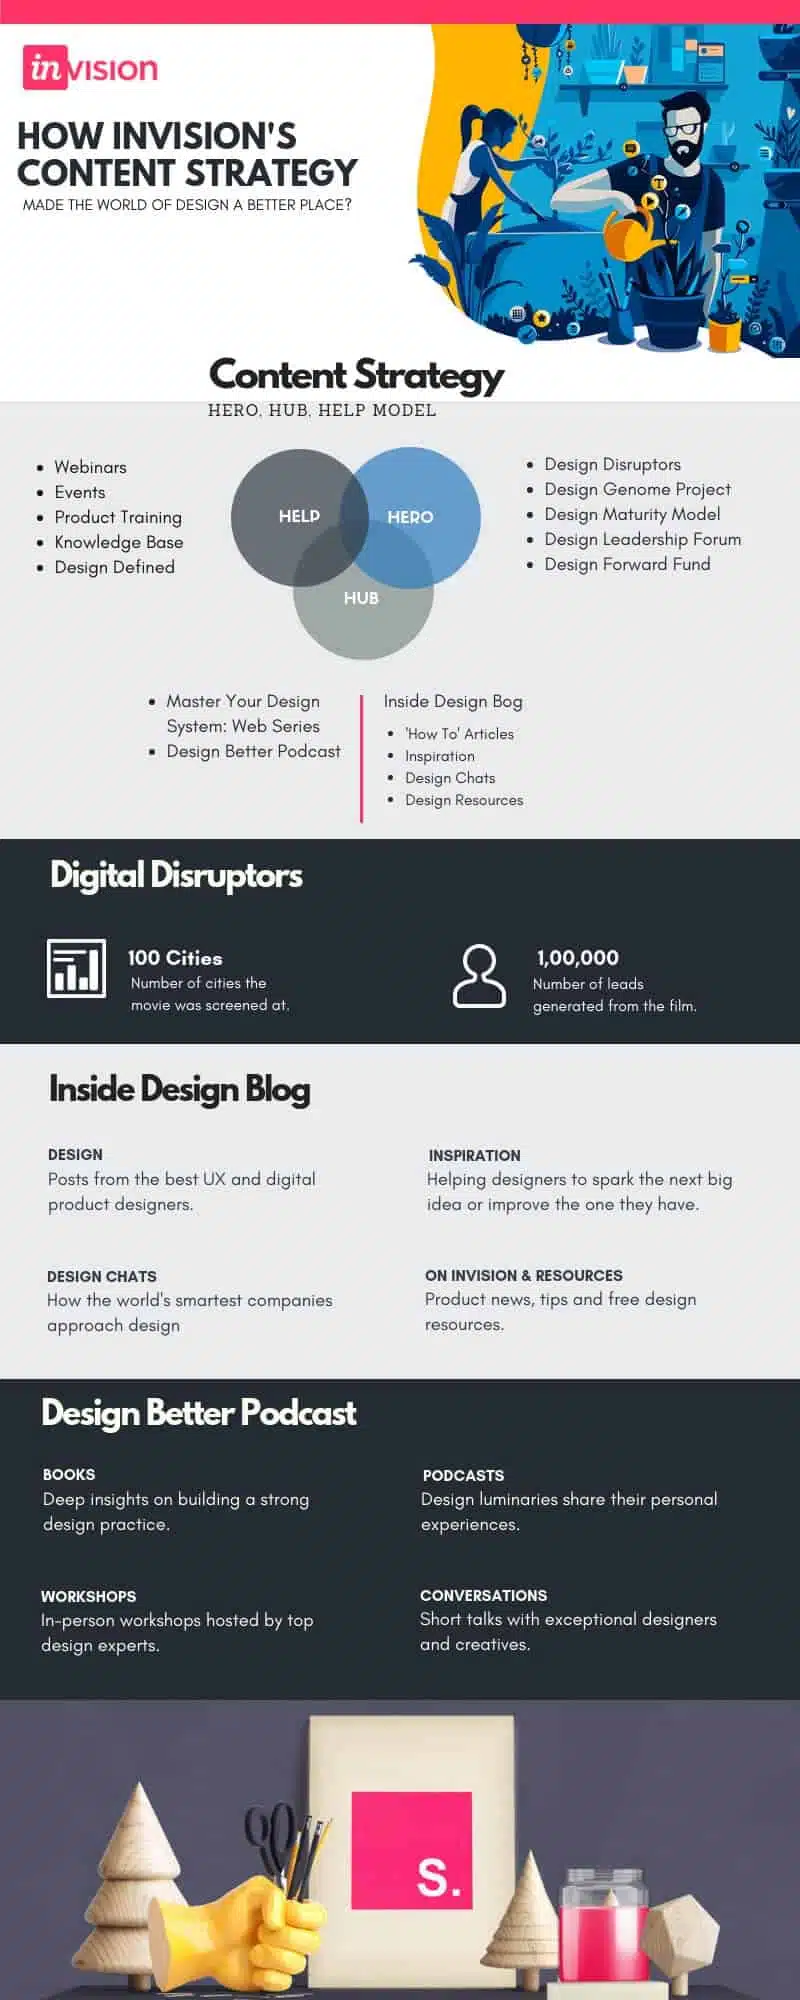 Inside InVision's Content Strategy Infographic